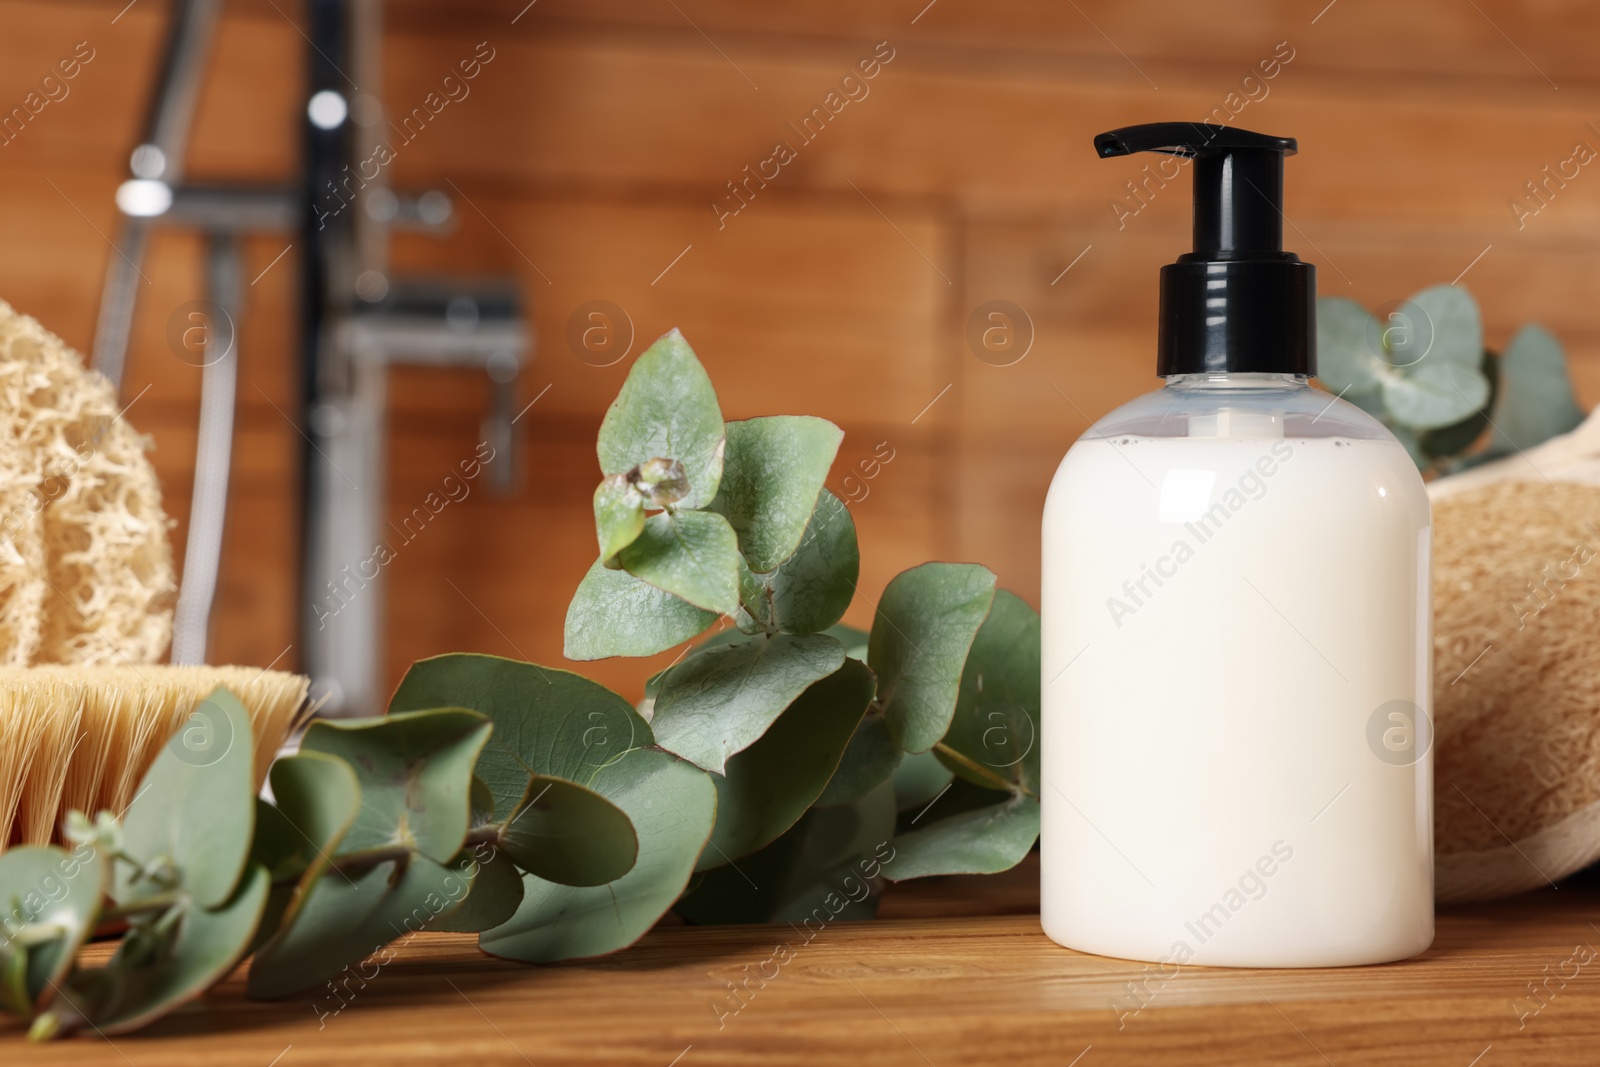 Photo of Dispenser of liquid soap and eucalyptus branch on wooden table